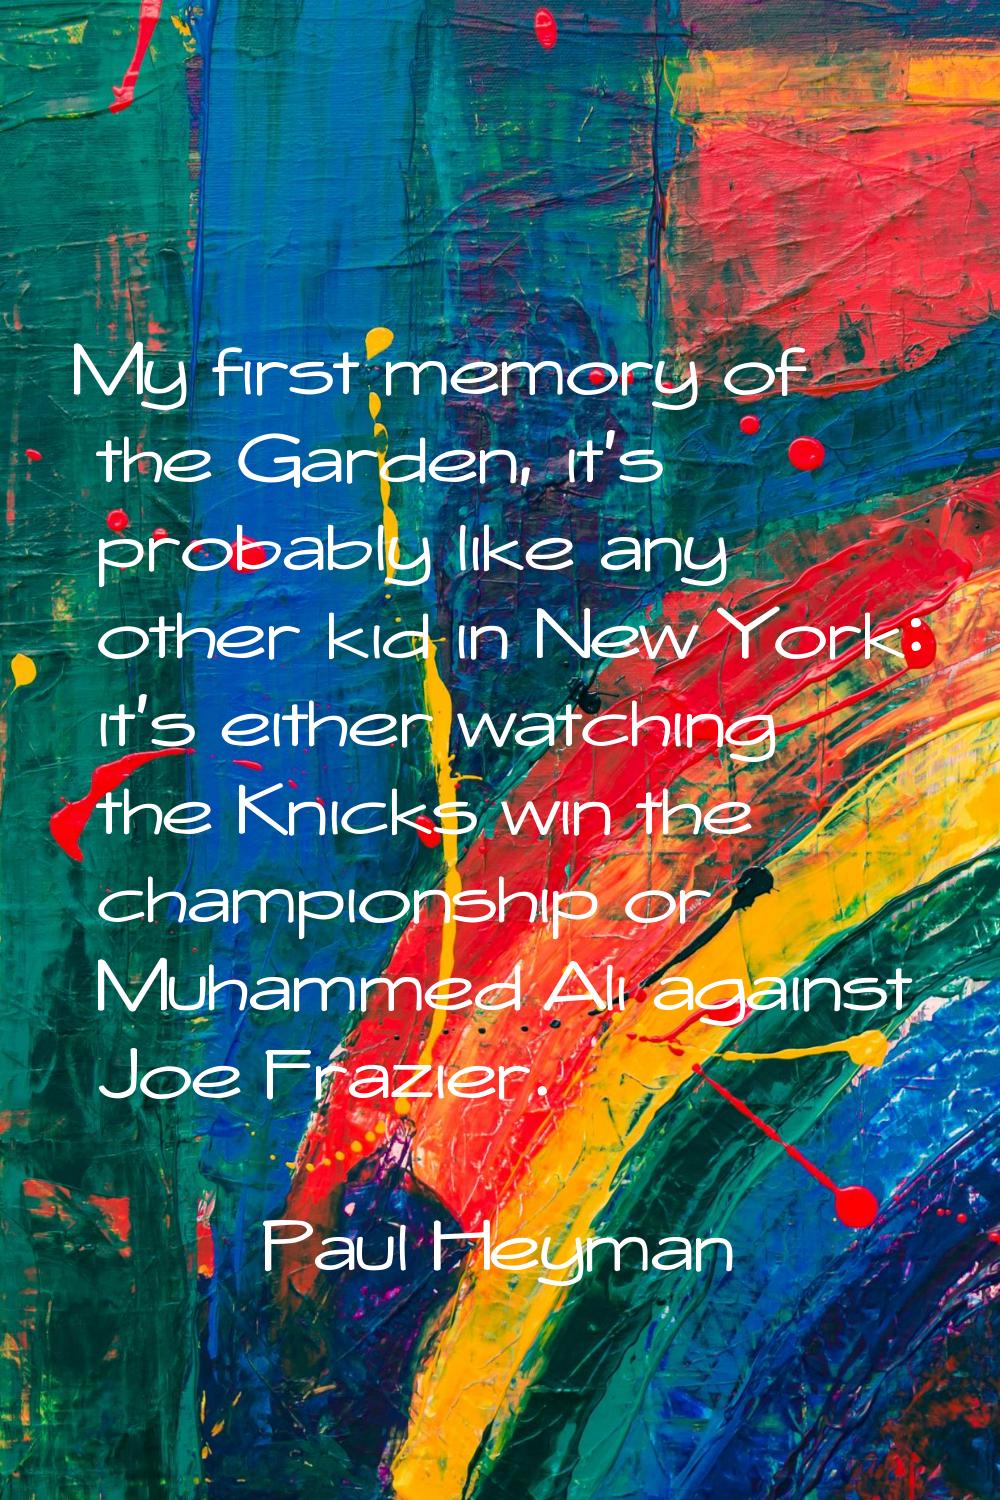 My first memory of the Garden, it's probably like any other kid in New York: it's either watching t